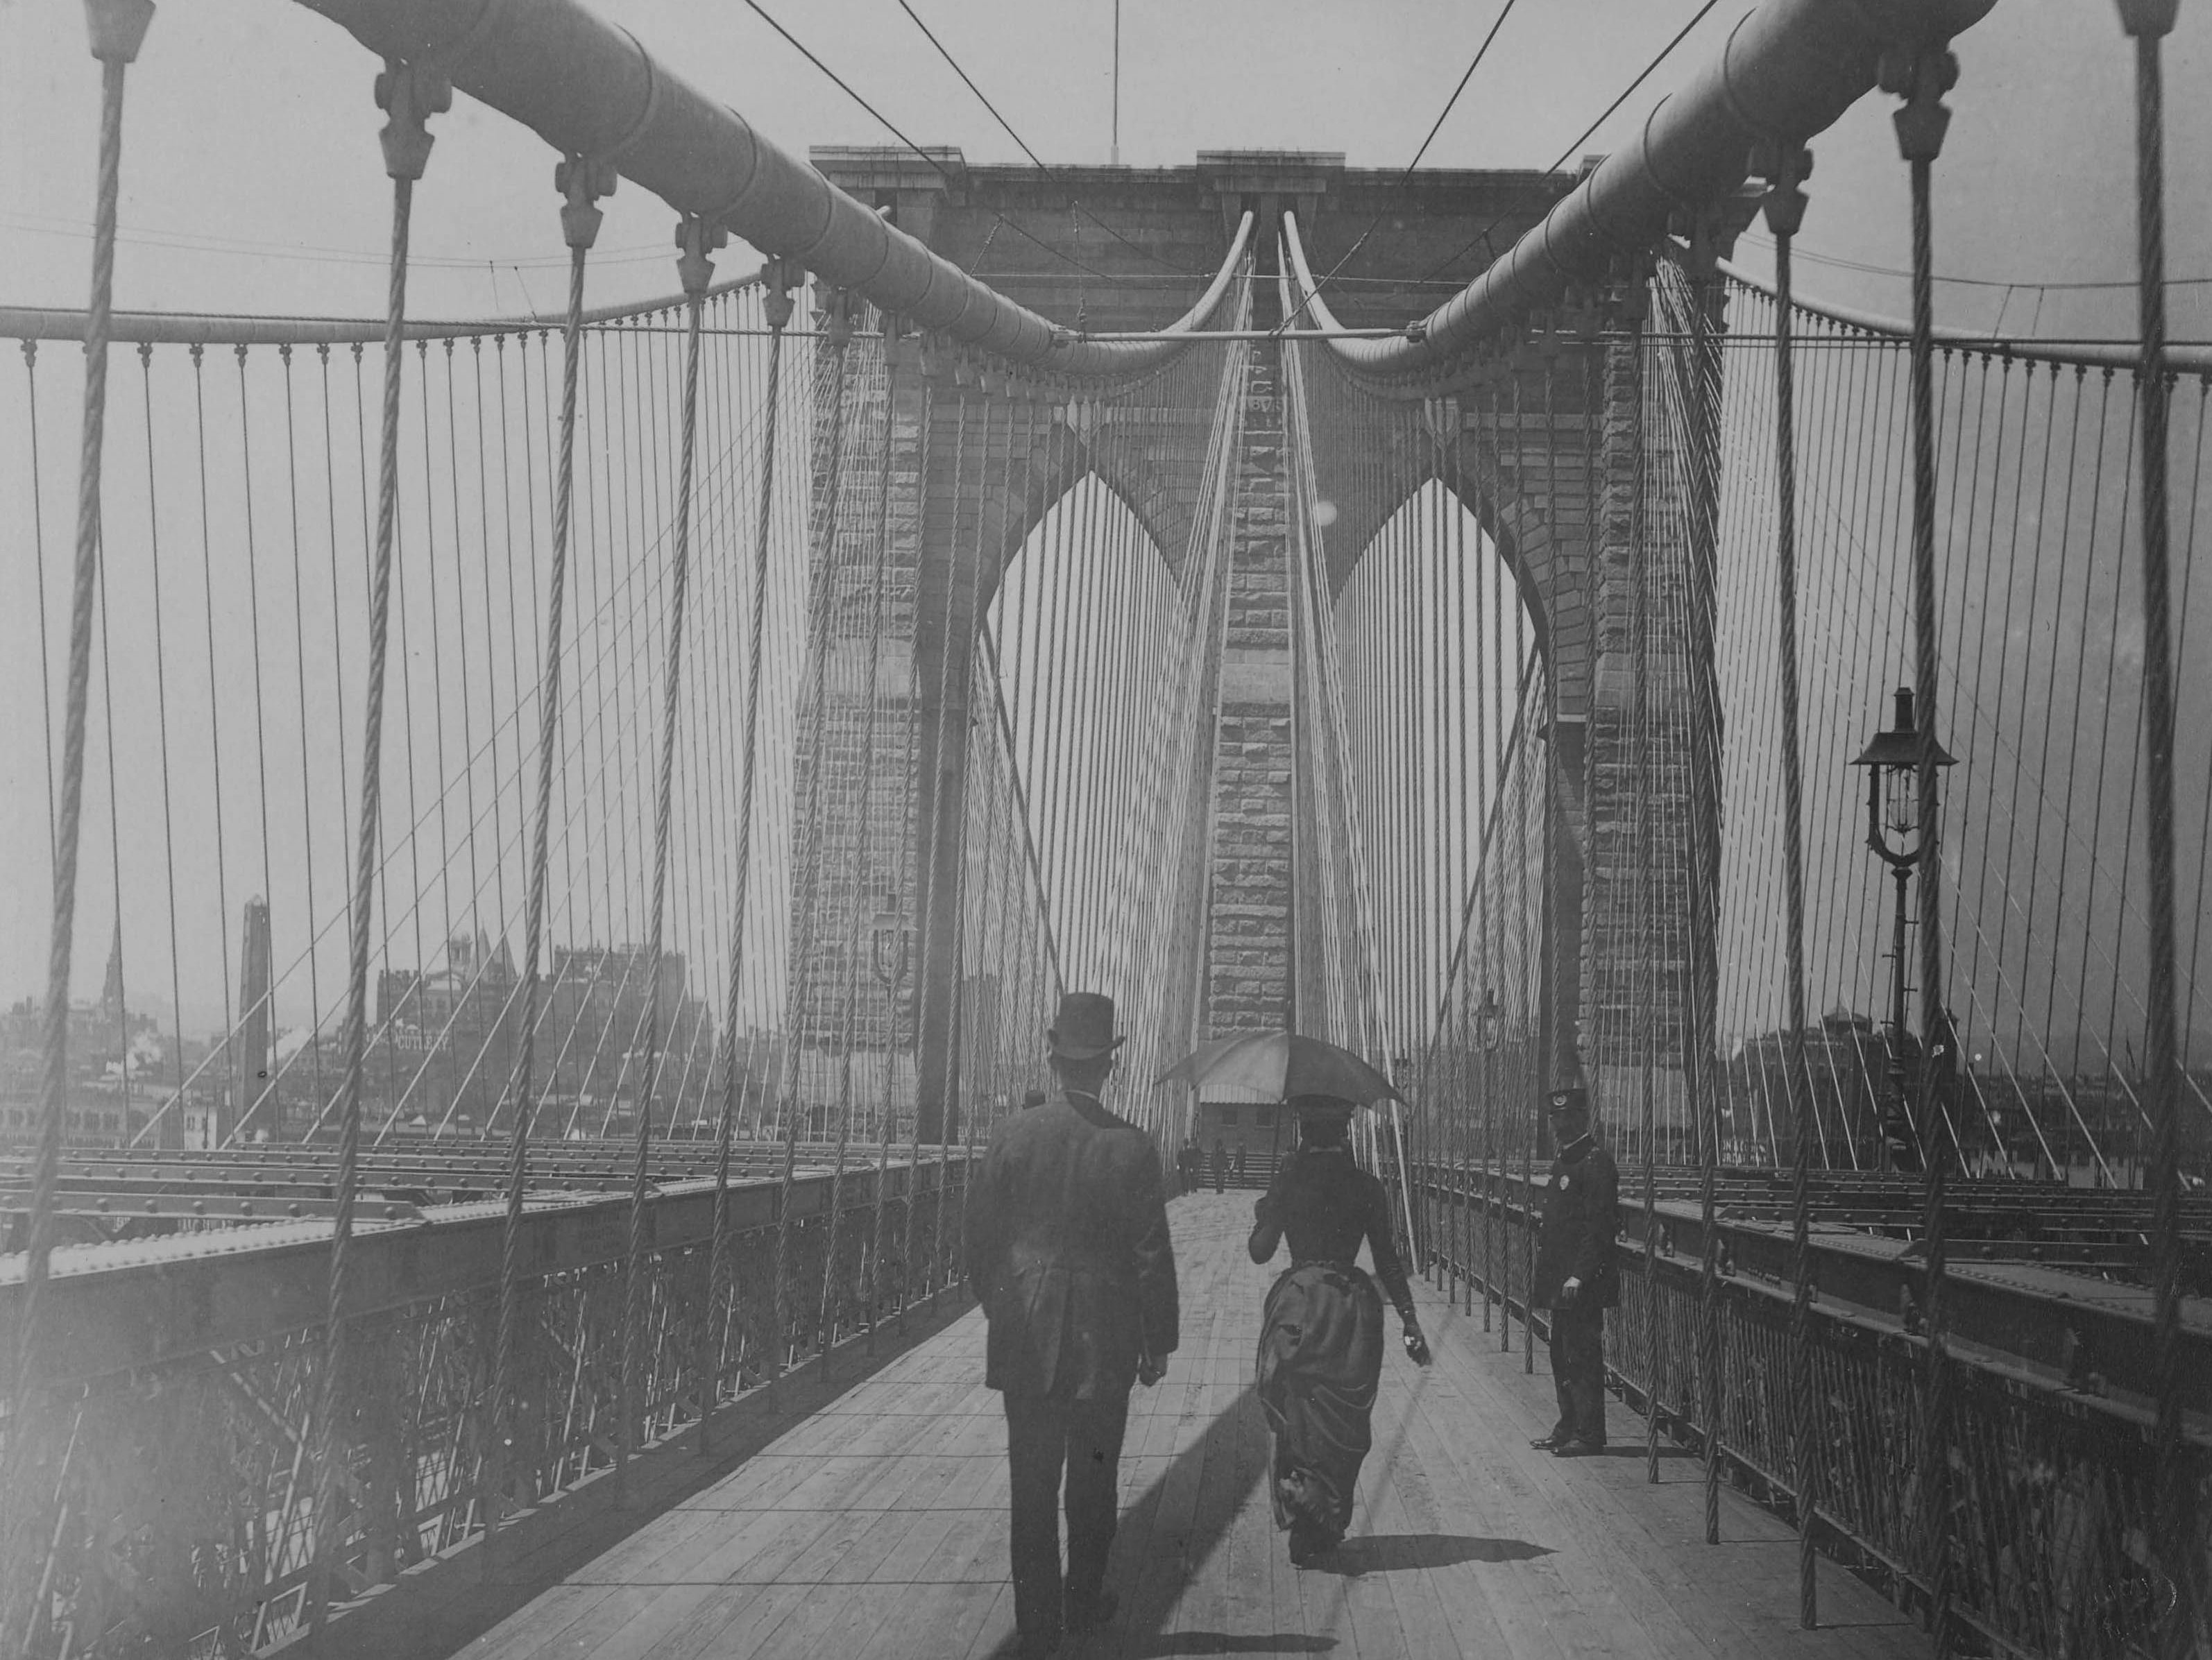 On the Brooklyn Bridge. Three people can be recognised.